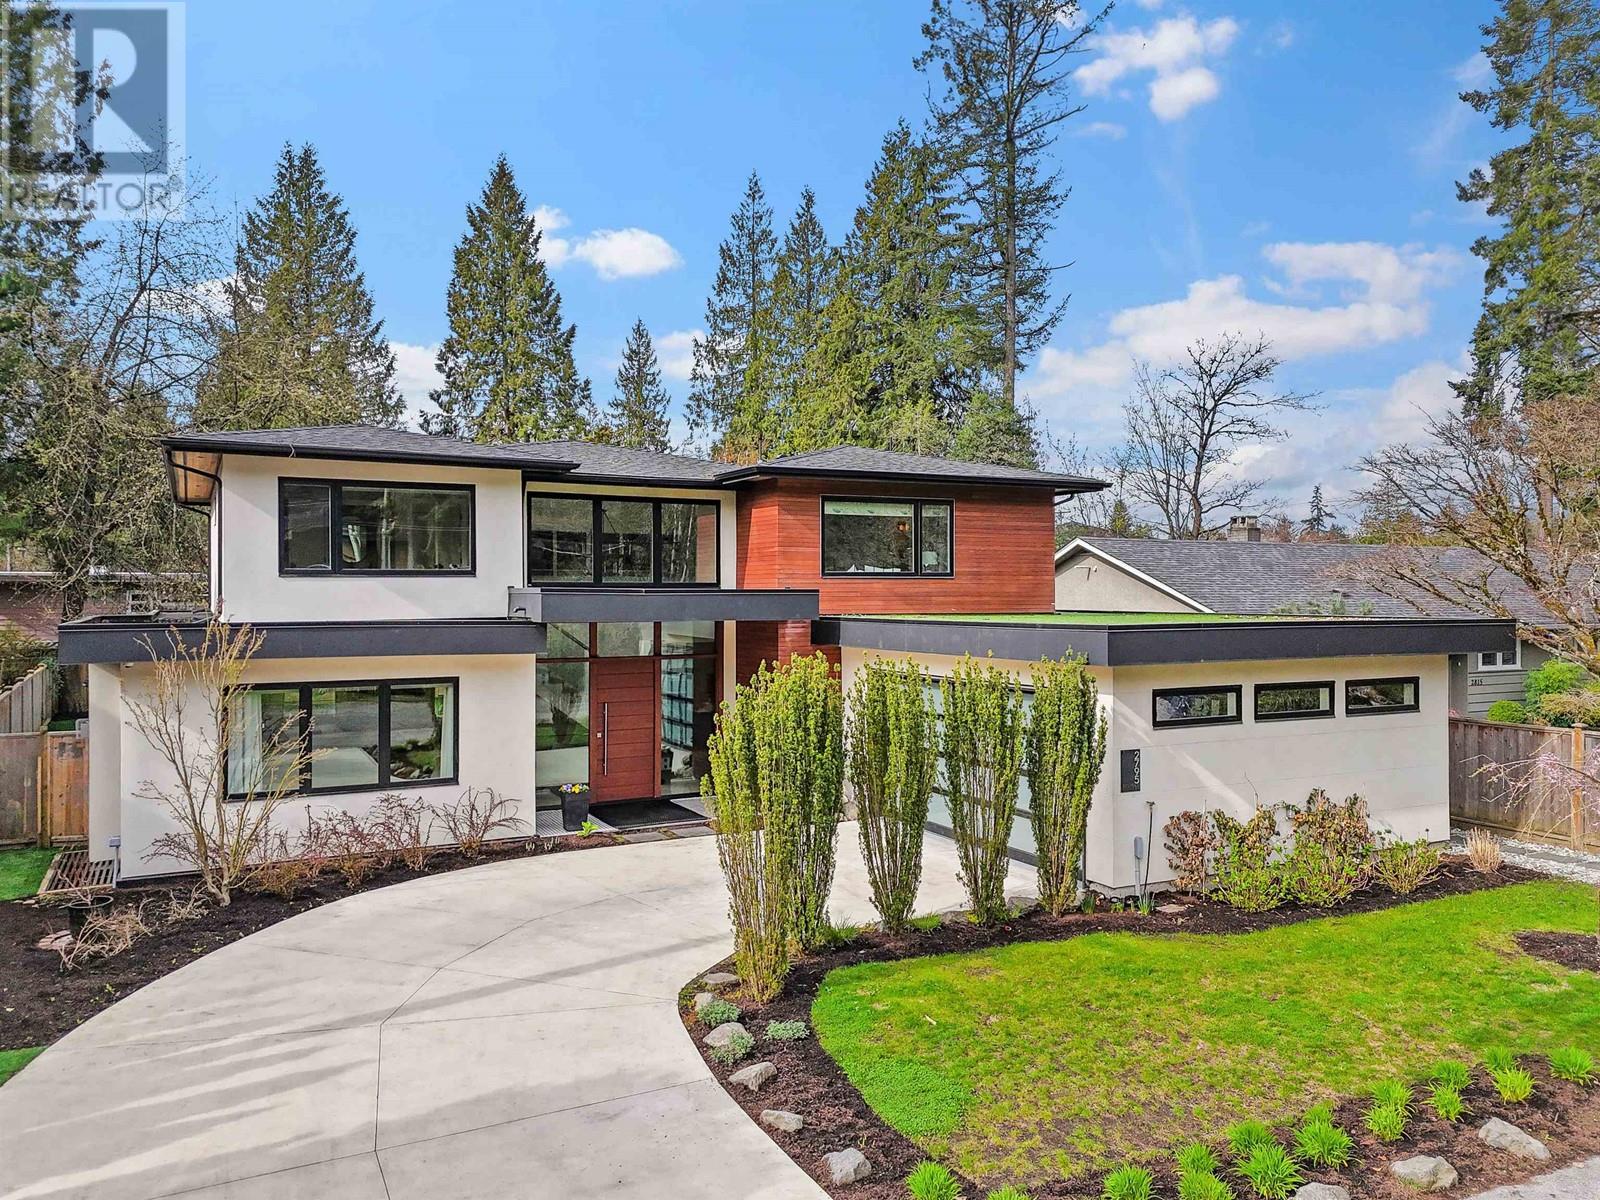 2795 COLWOOD DRIVE, north vancouver, British Columbia